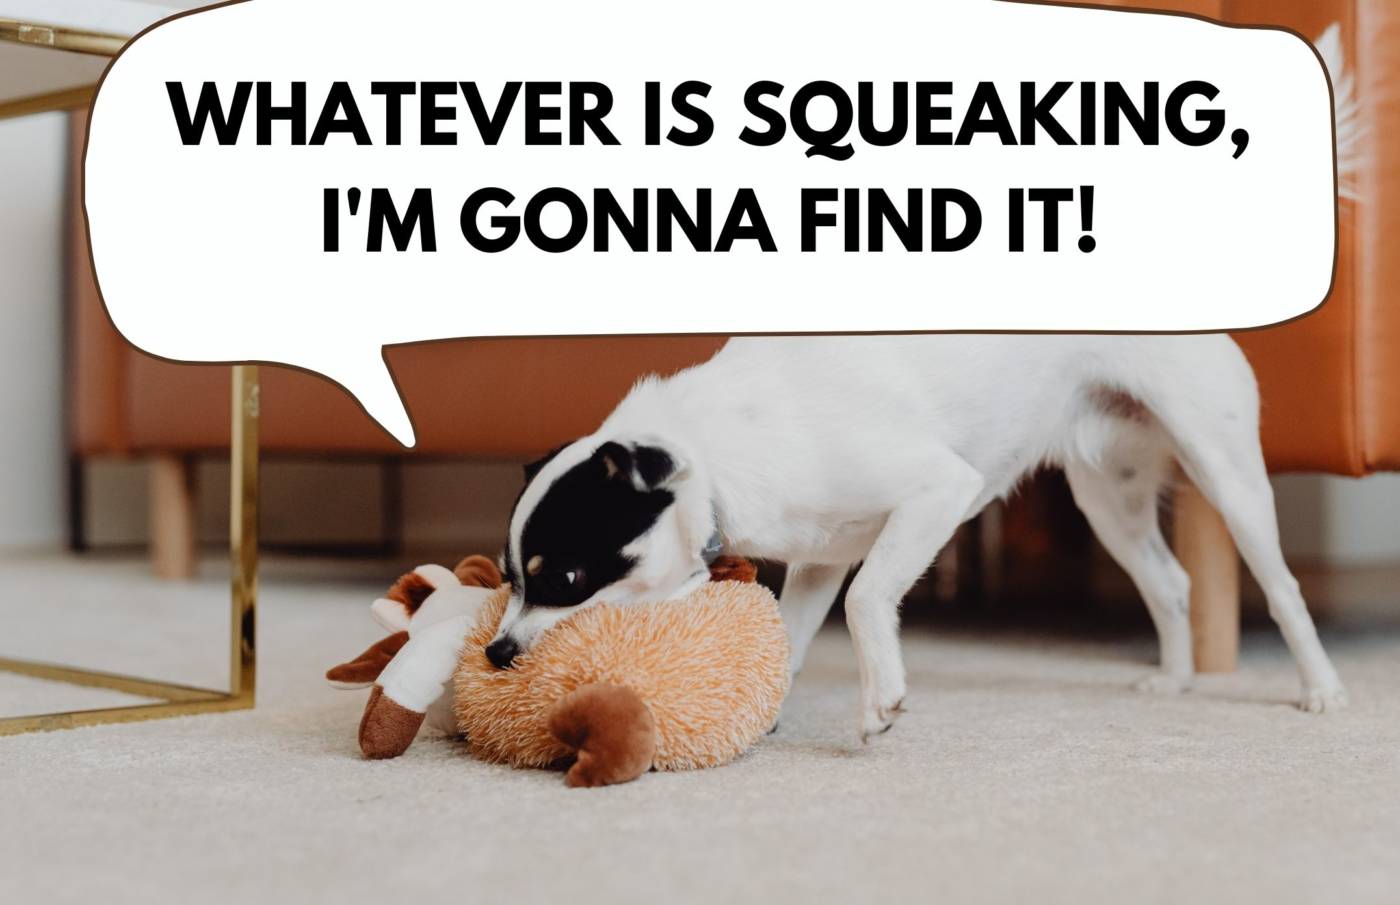 dog chewing squeaking toy